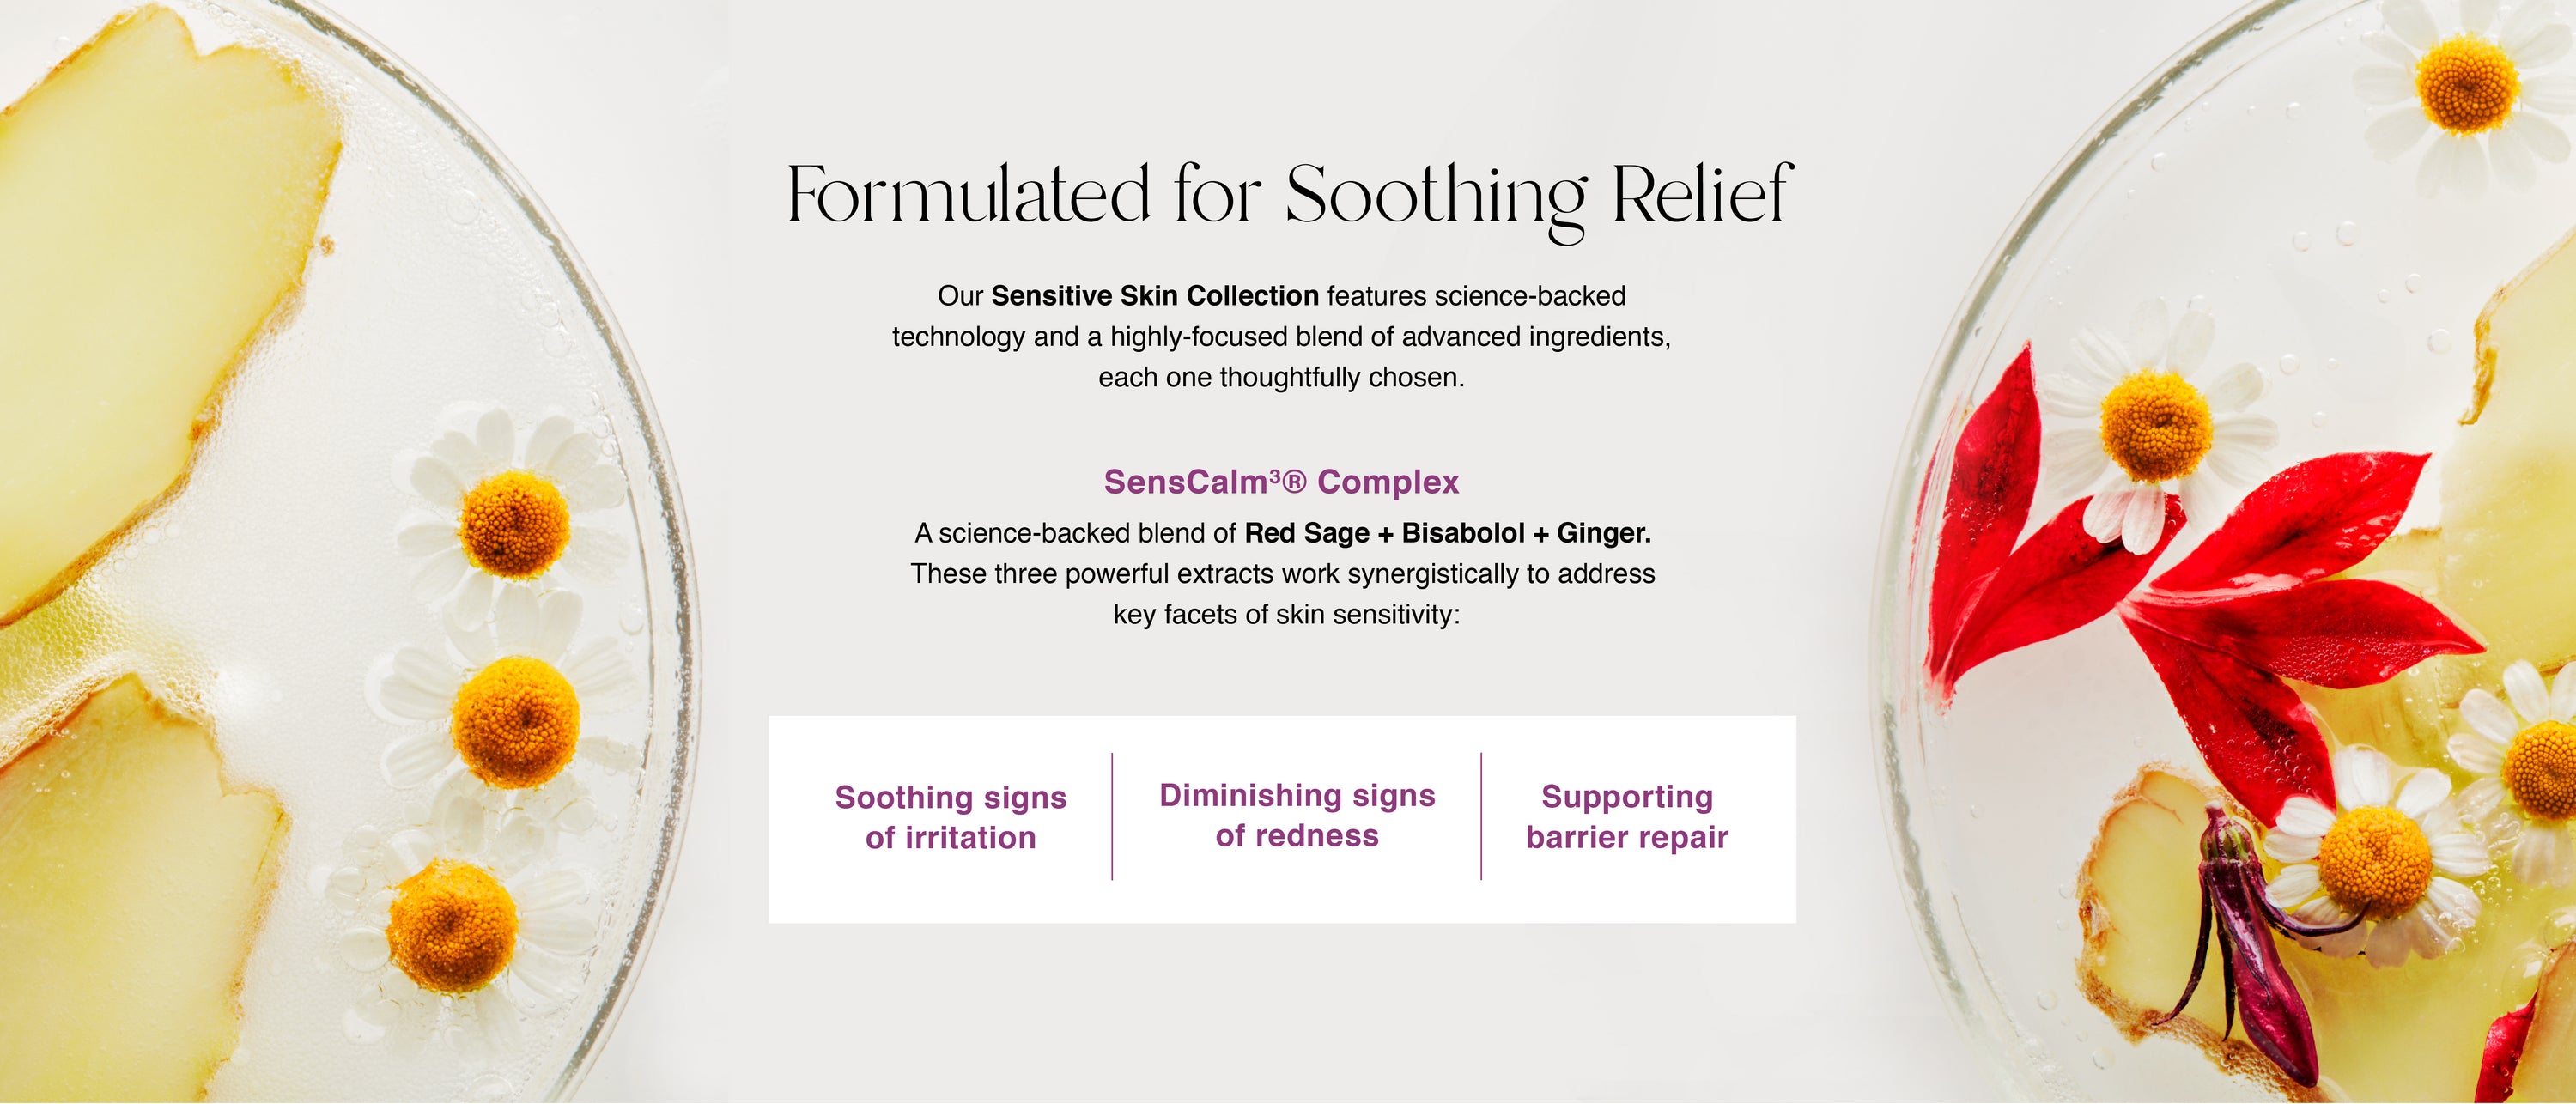 Image of Formulated for Soothing Relief. Our Sensitive Skin Collection features science-backed technology and a highly focused blend of active ingredients, each one thoughtfully chose. 